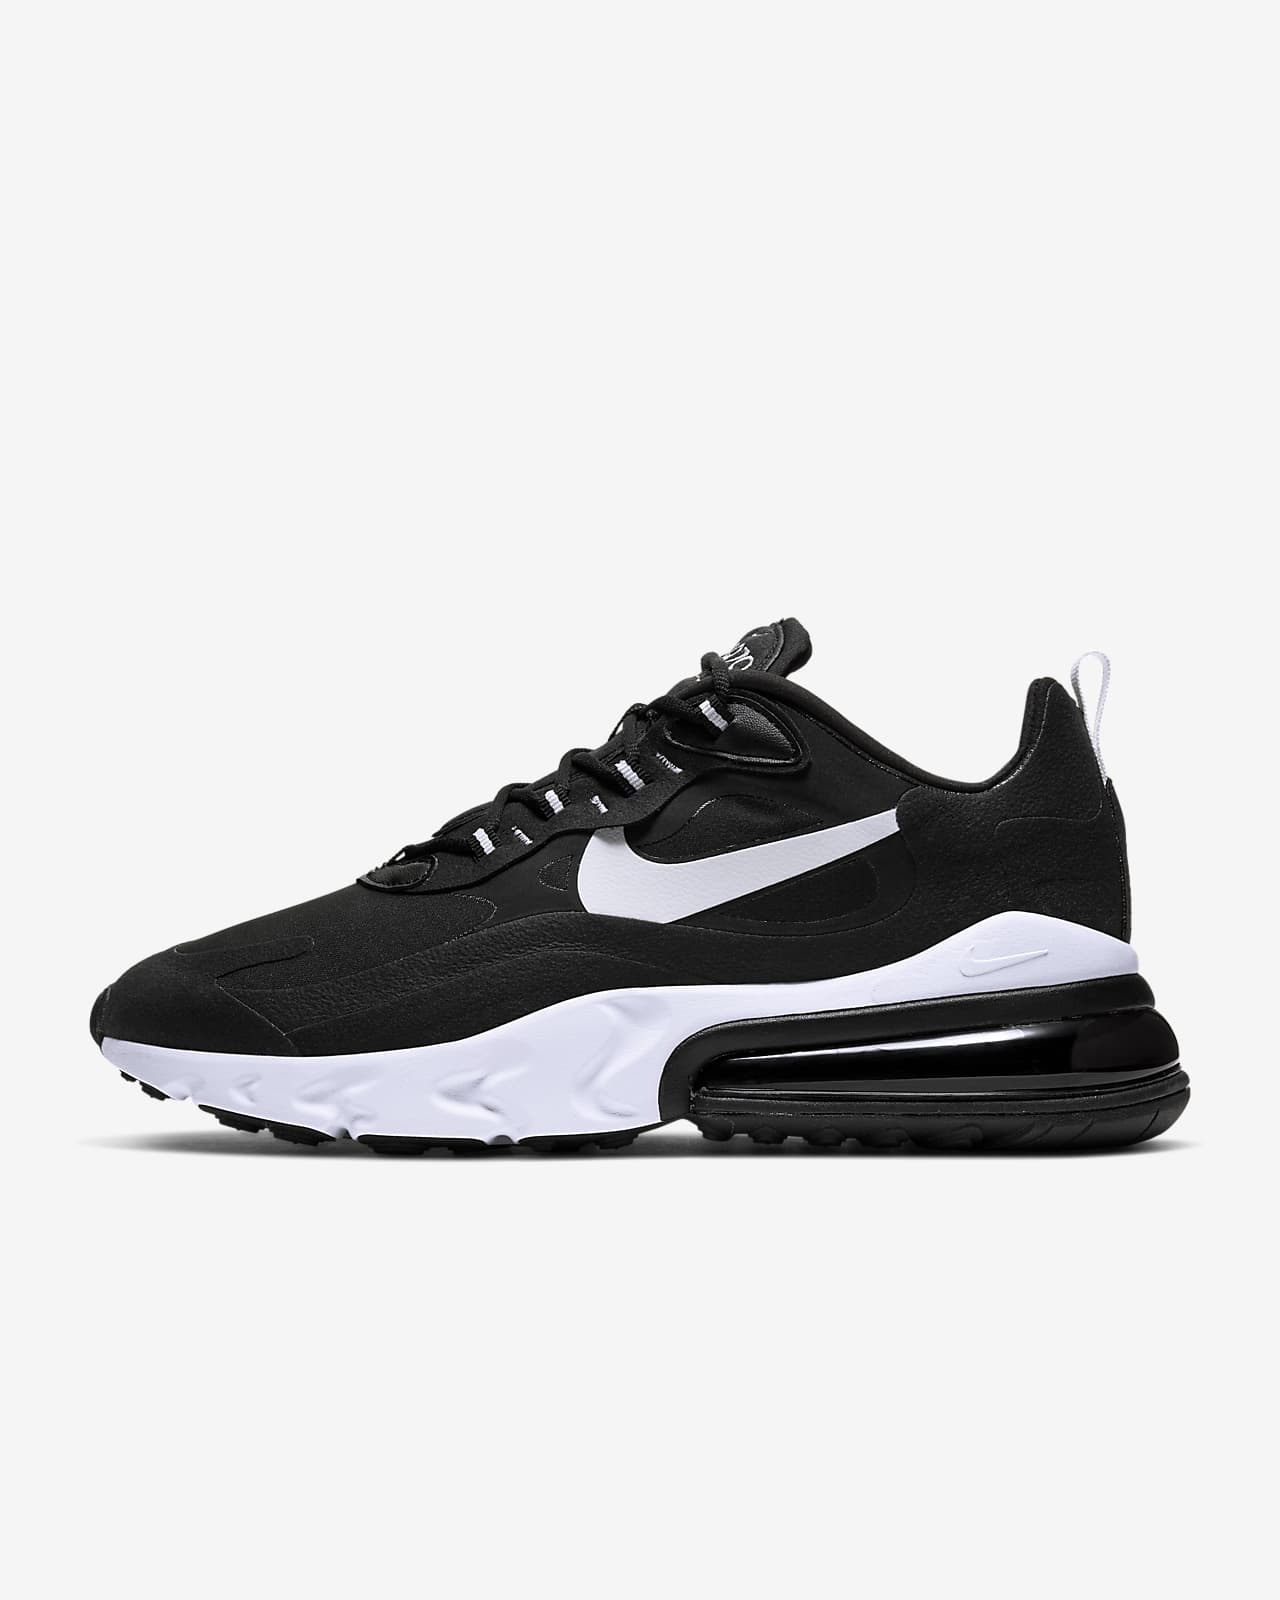 nike 270 reacts mens